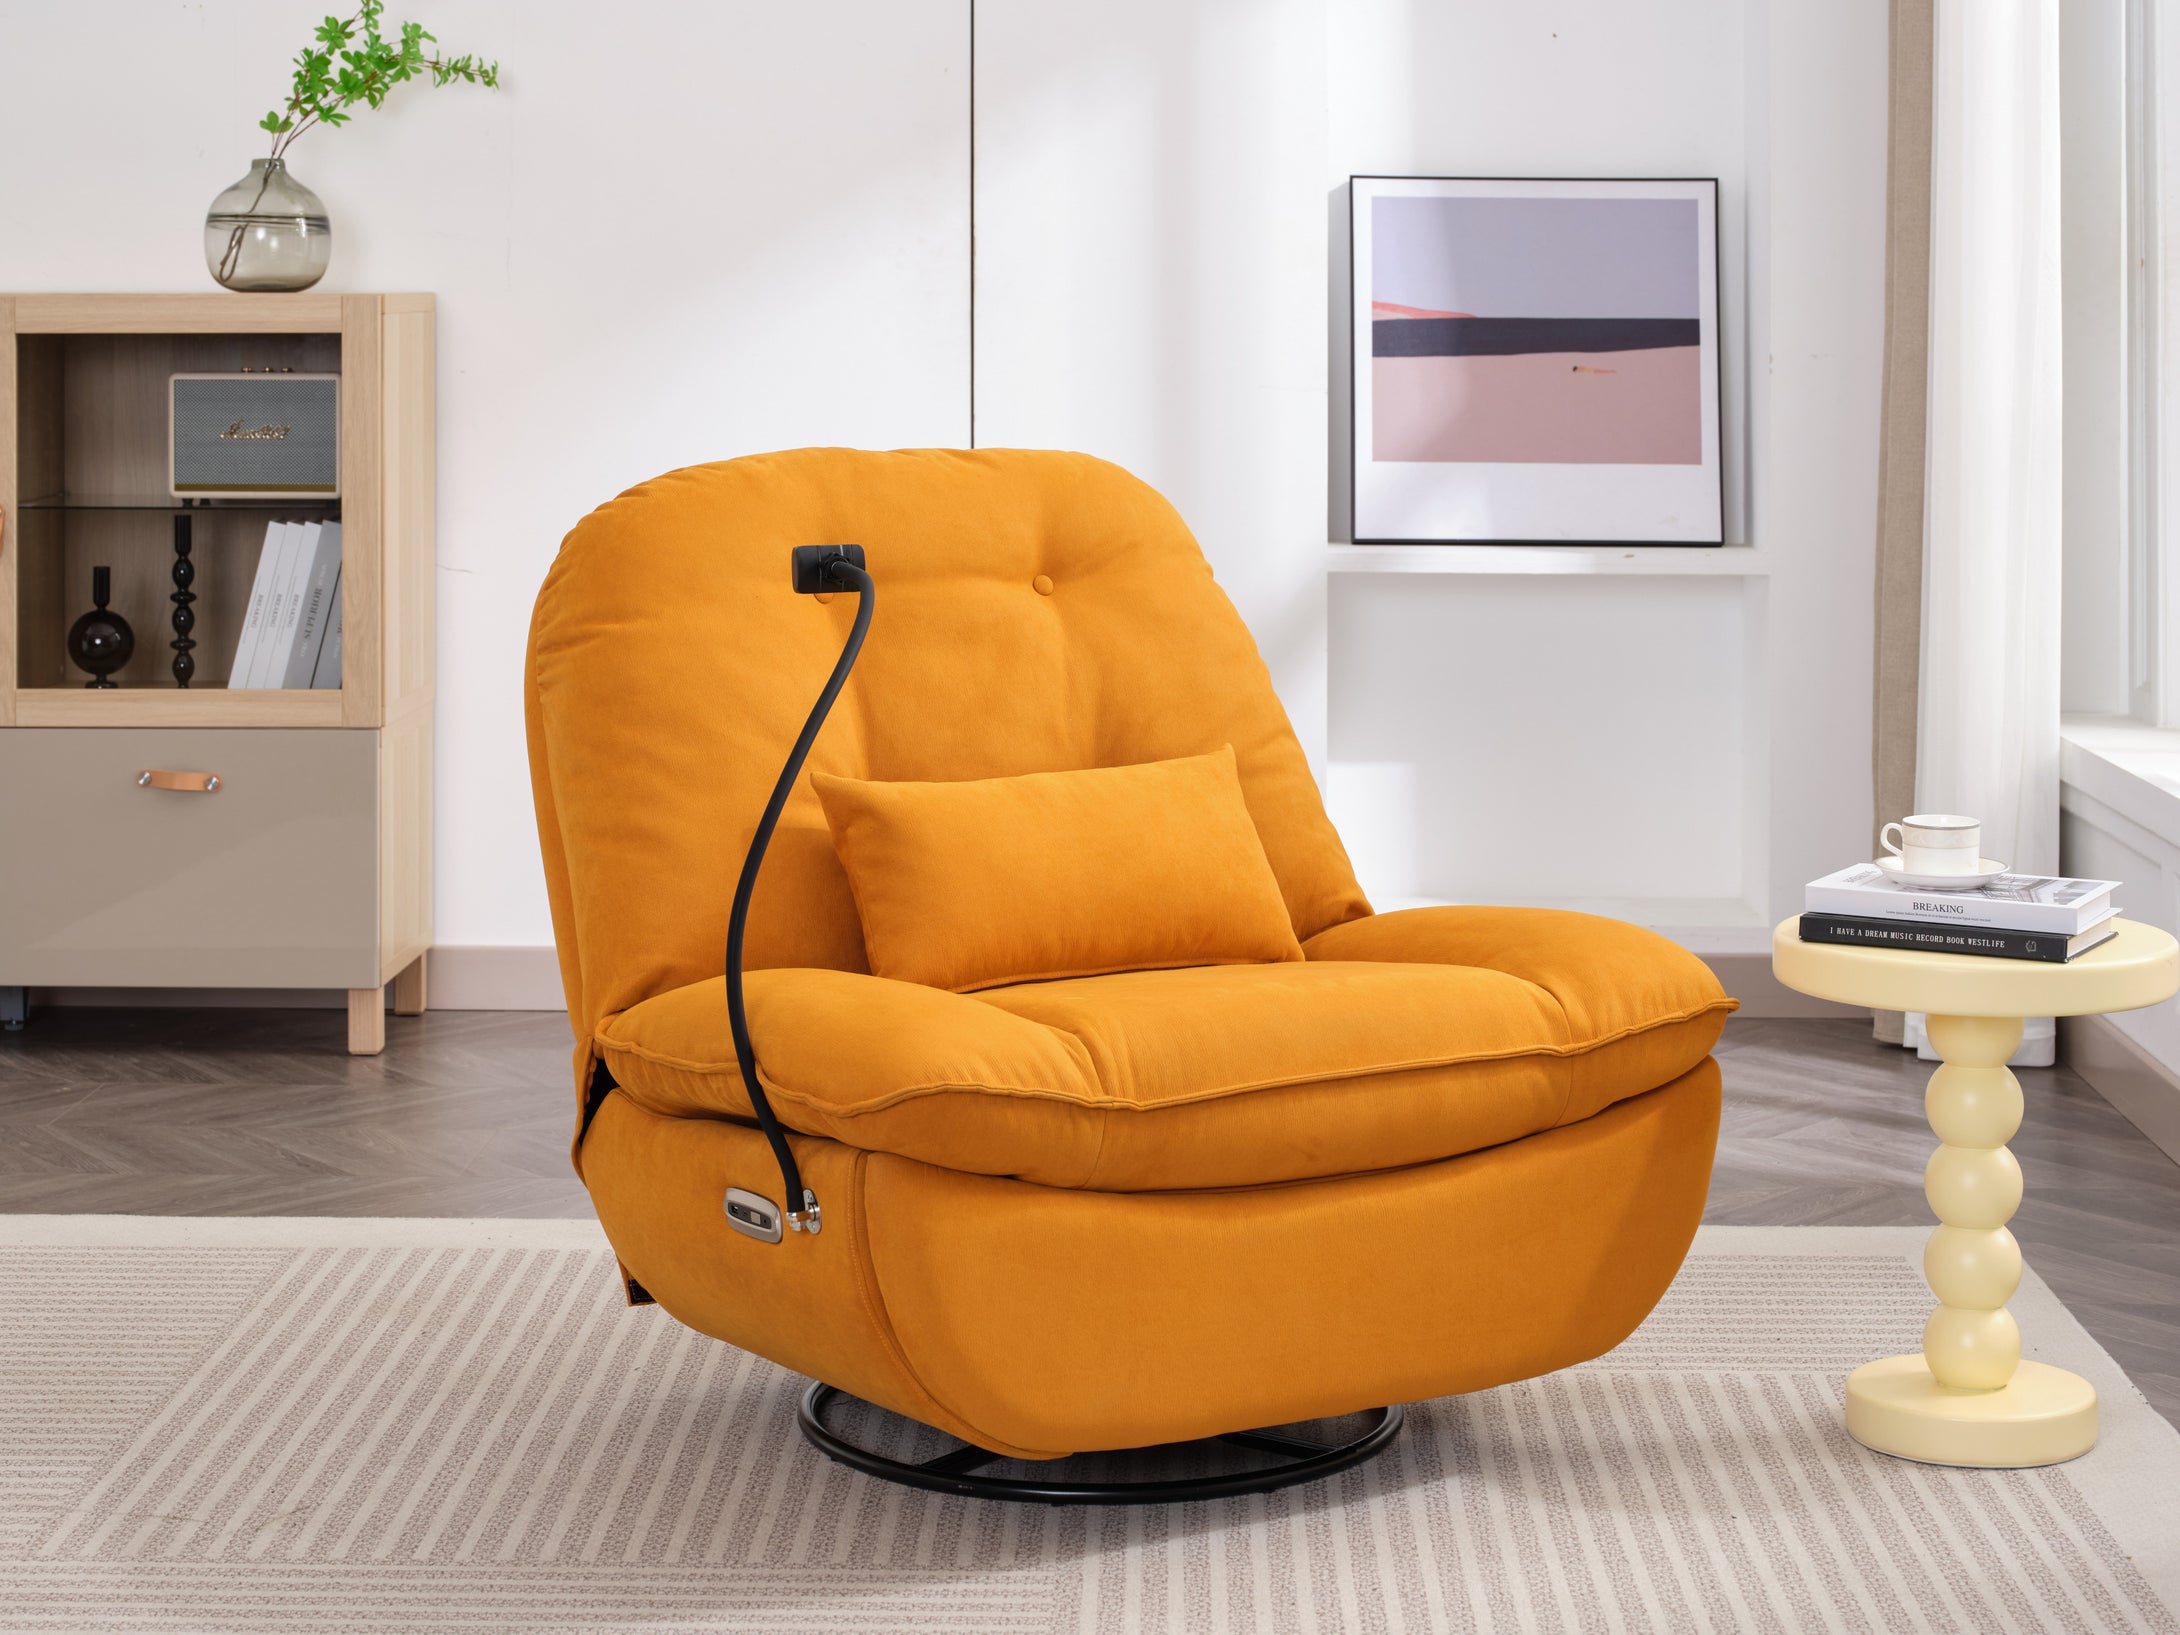 Smart Power 270° Swivel Glider Recliner Gaming Chair with USB Charger, Phone Holder, Hidden Storage Compartments and Bluetooth Music Player, Orange